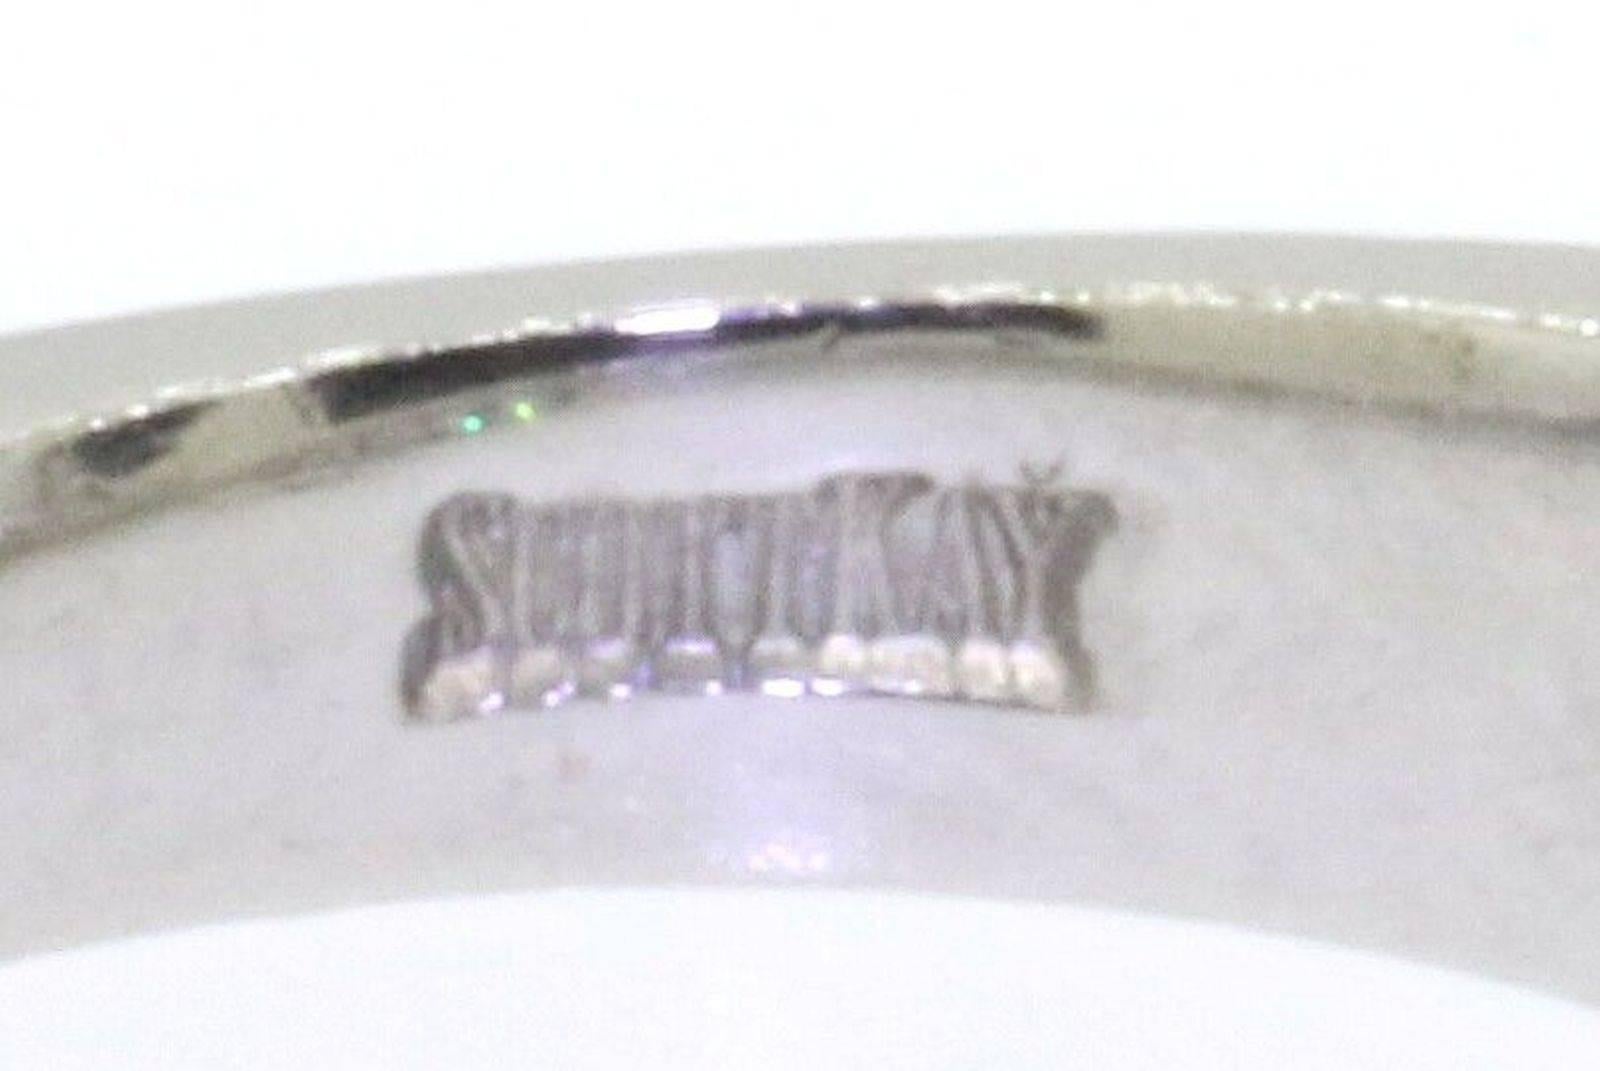 Stunning Scott Kay platinum diamond ring.  Centre diamond 1 ct F - G SI2 and side diamonds totalling 0.60 cts of F-G VS baguette cuts.    Size 6.75 and weighs 9.74 grams.  Easily re-sized.